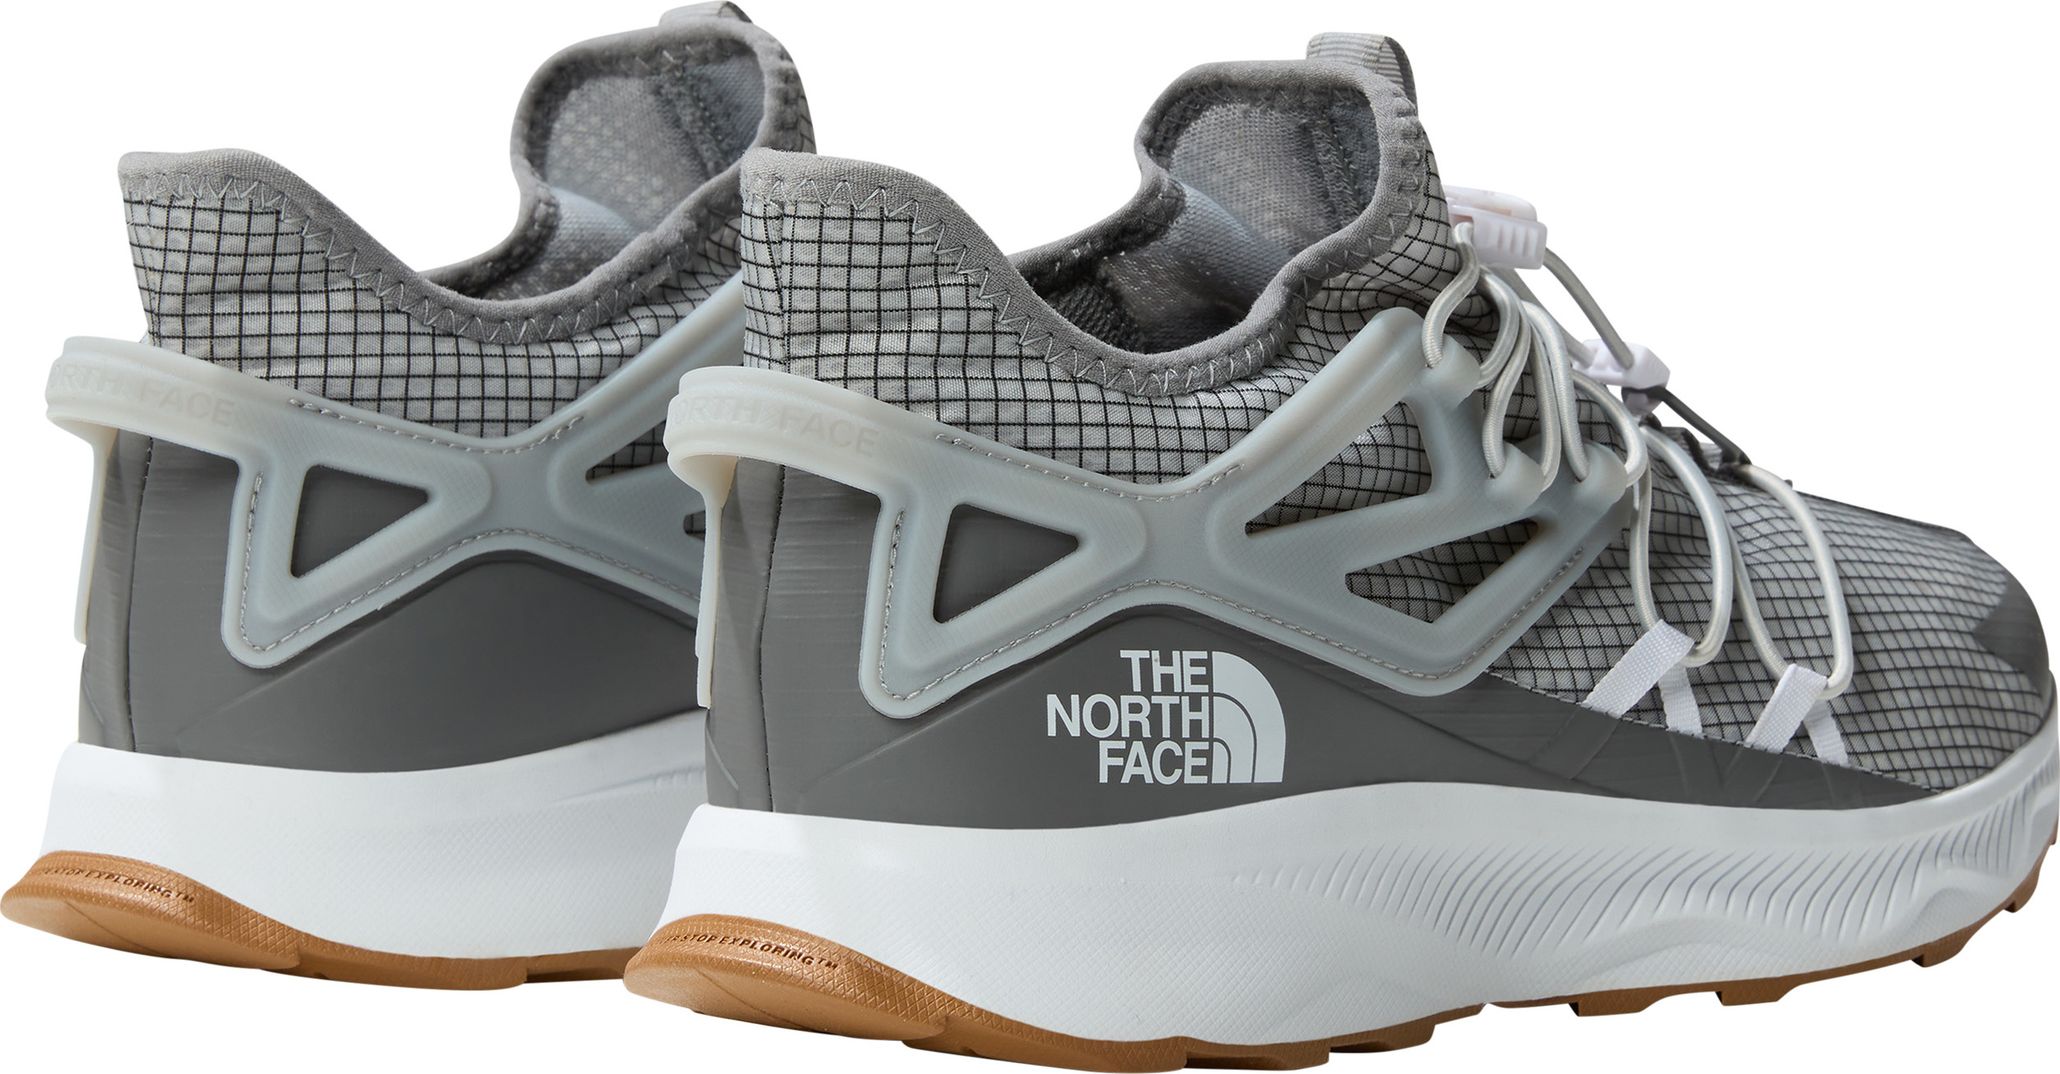 The North Face M OXEYE TECH High Rise Grey/Smoked Pearl